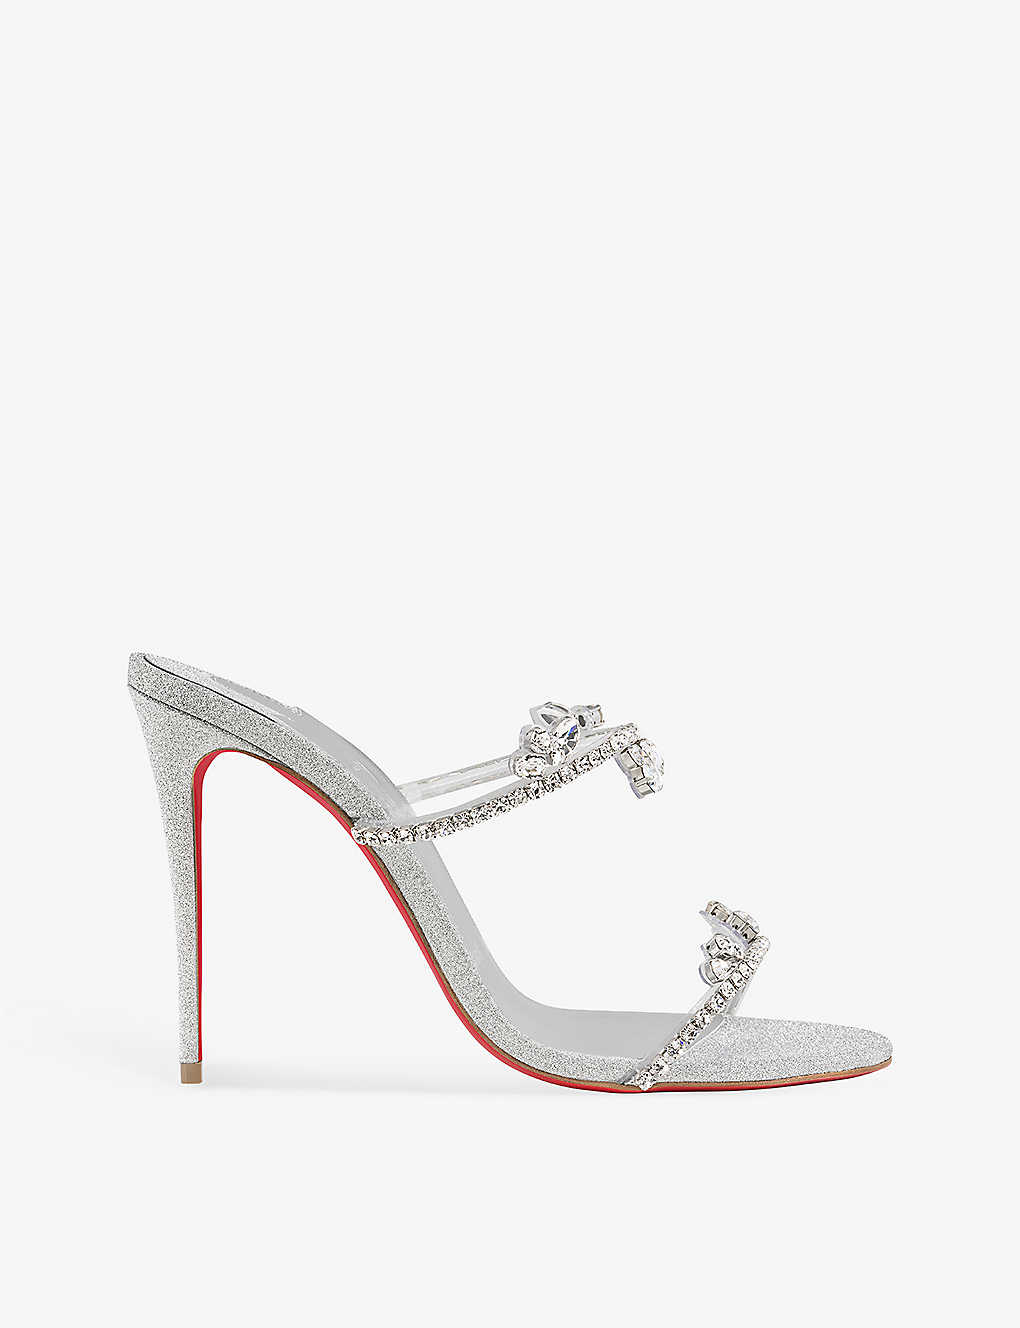 Christian Louboutin Just Queen 100 Crystal-embellished Pvc Mules In Silver/cry/lin